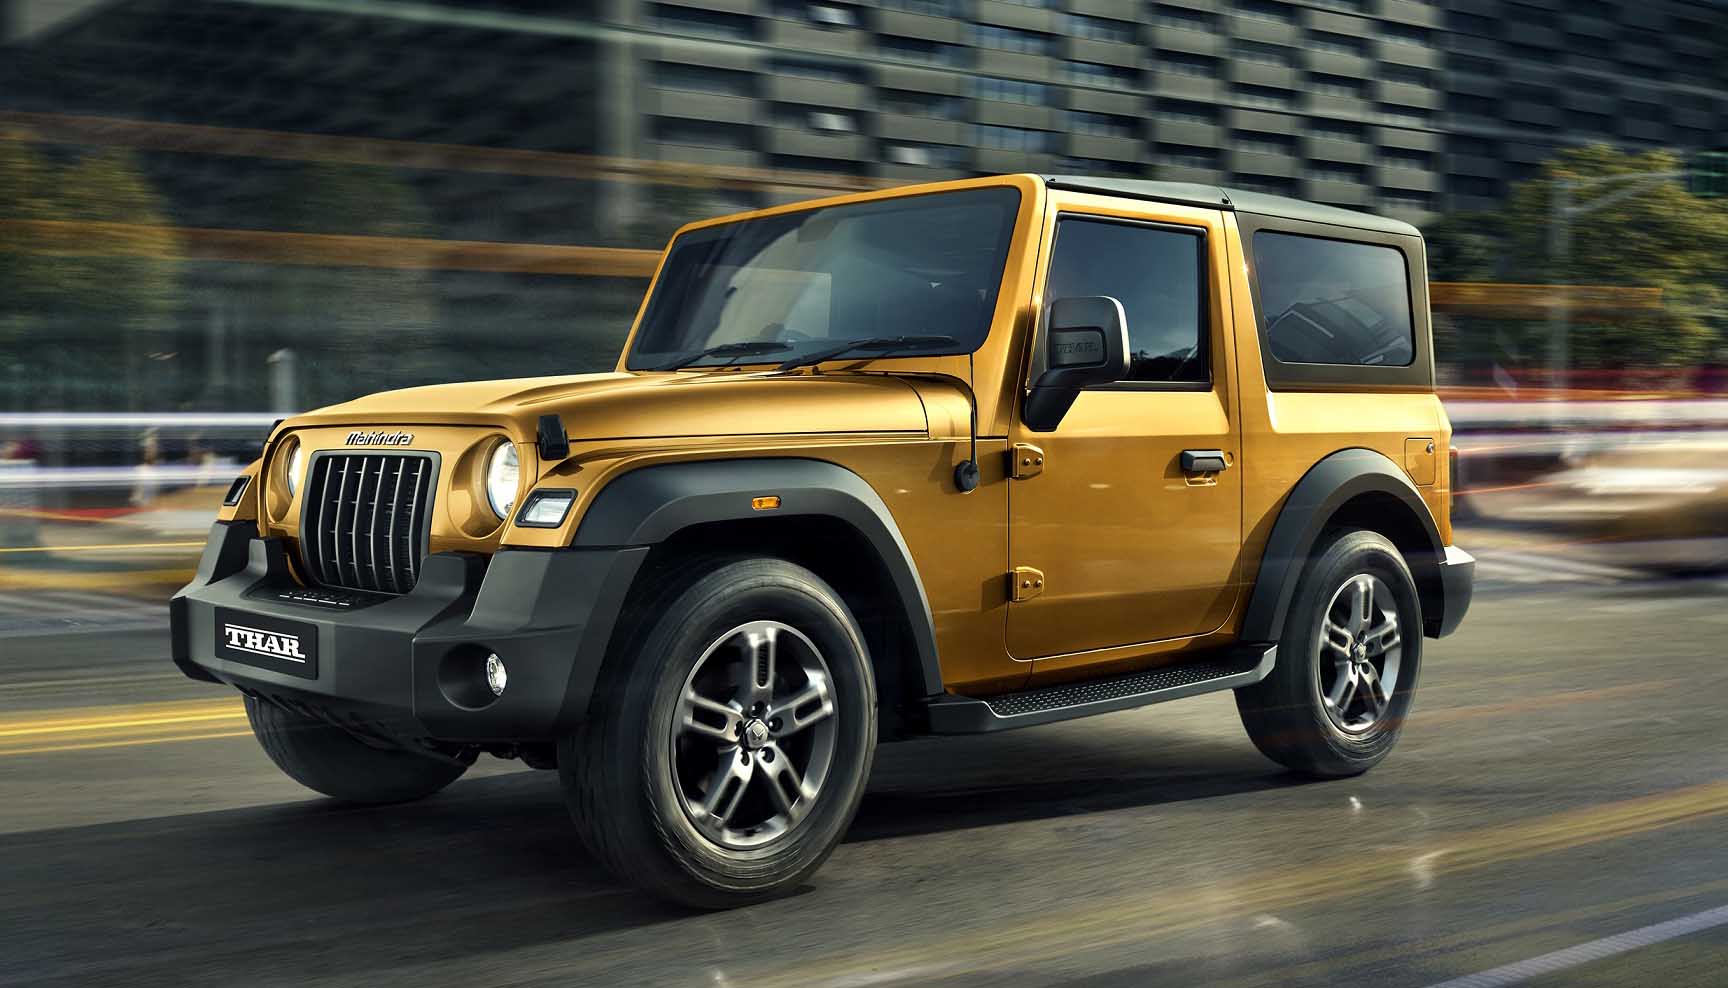 Good news for Mahindra Thar enthusiasts: New Thar will be available at this price